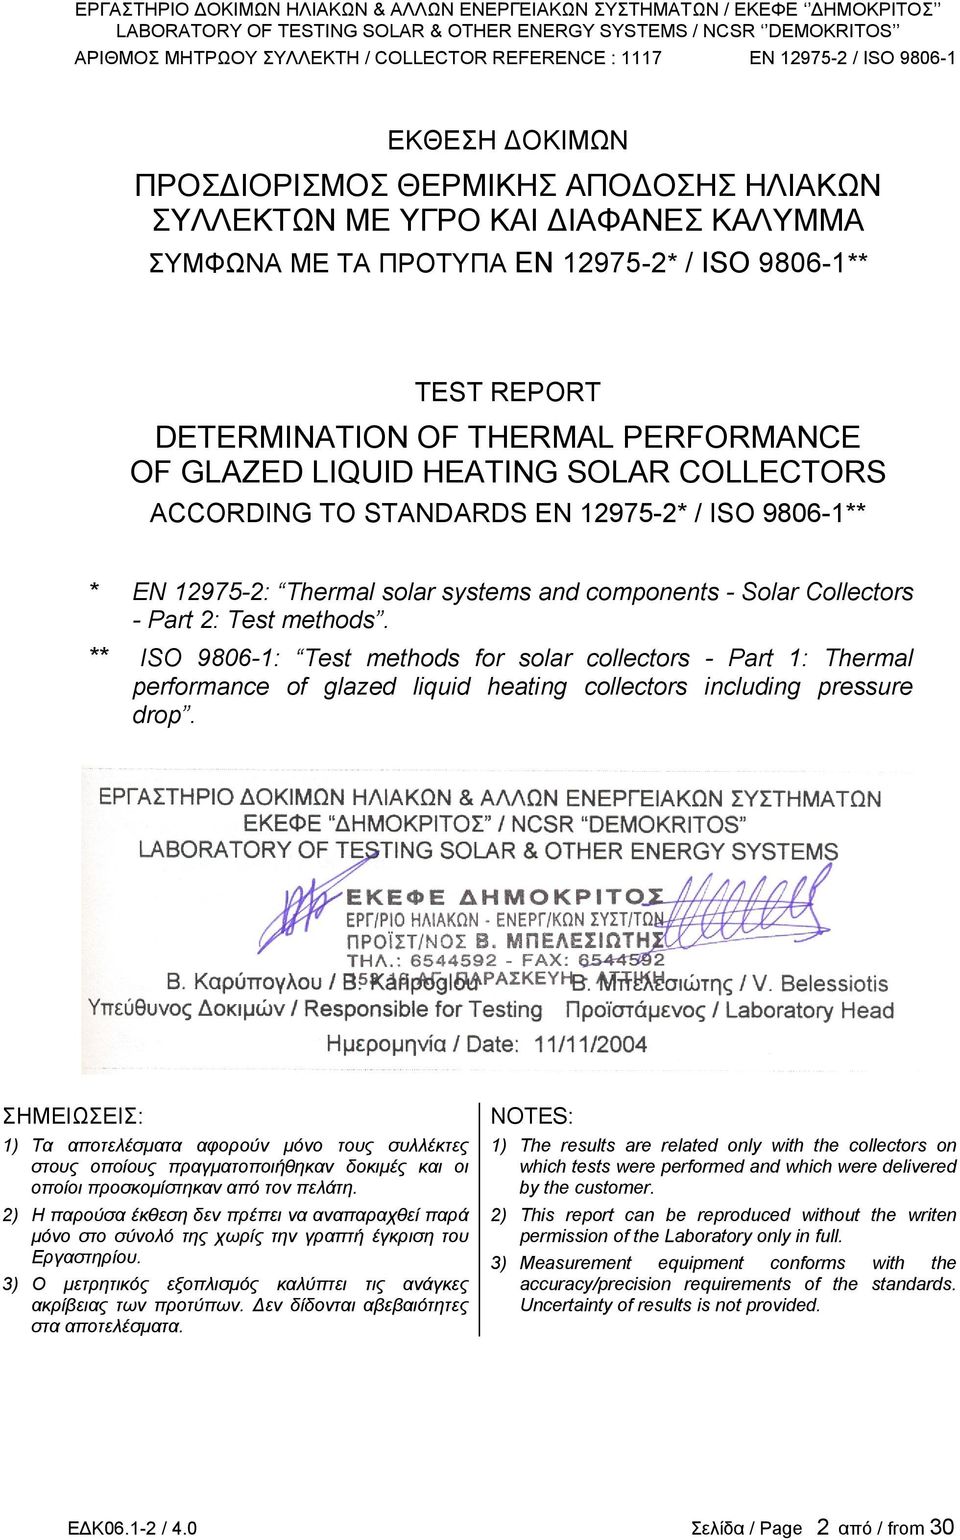 ** ISO 9806-1: Test methods for solar collectors - Part 1: Thermal performance of glazed liquid heating collectors including pressure drop.